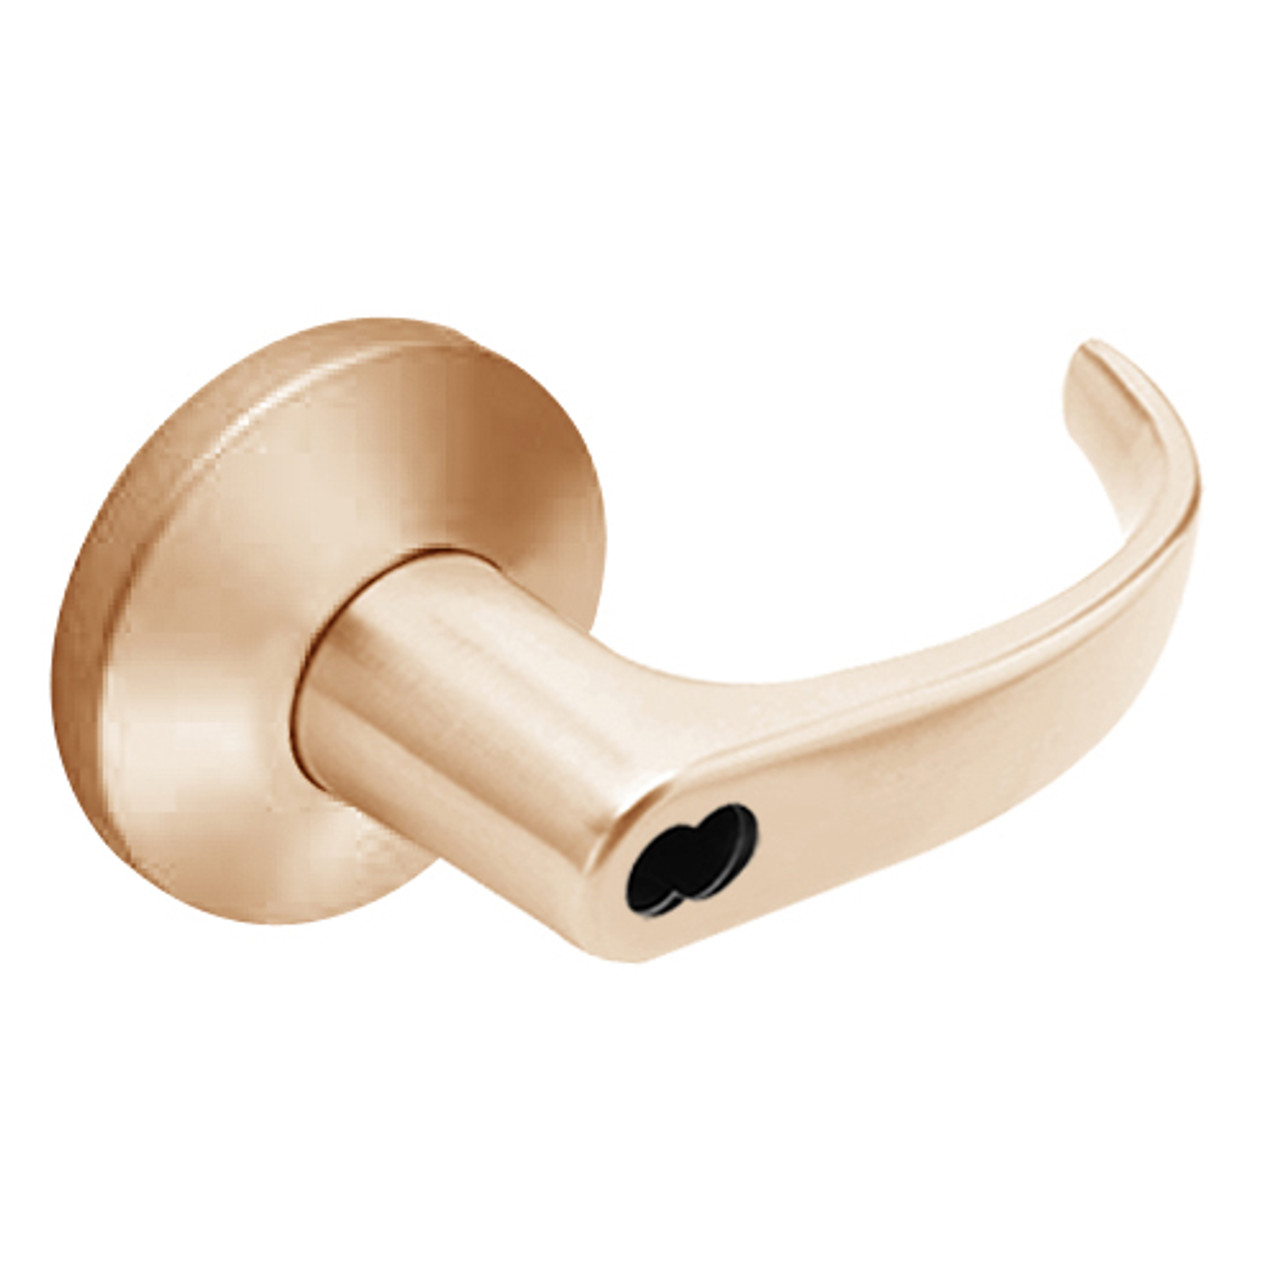 9K37XR14KSTK612 Best 9K Series Special Function Cylindrical Lever Locks with Curved with Return Lever Design Accept 7 Pin Best Core in Satin Bronze